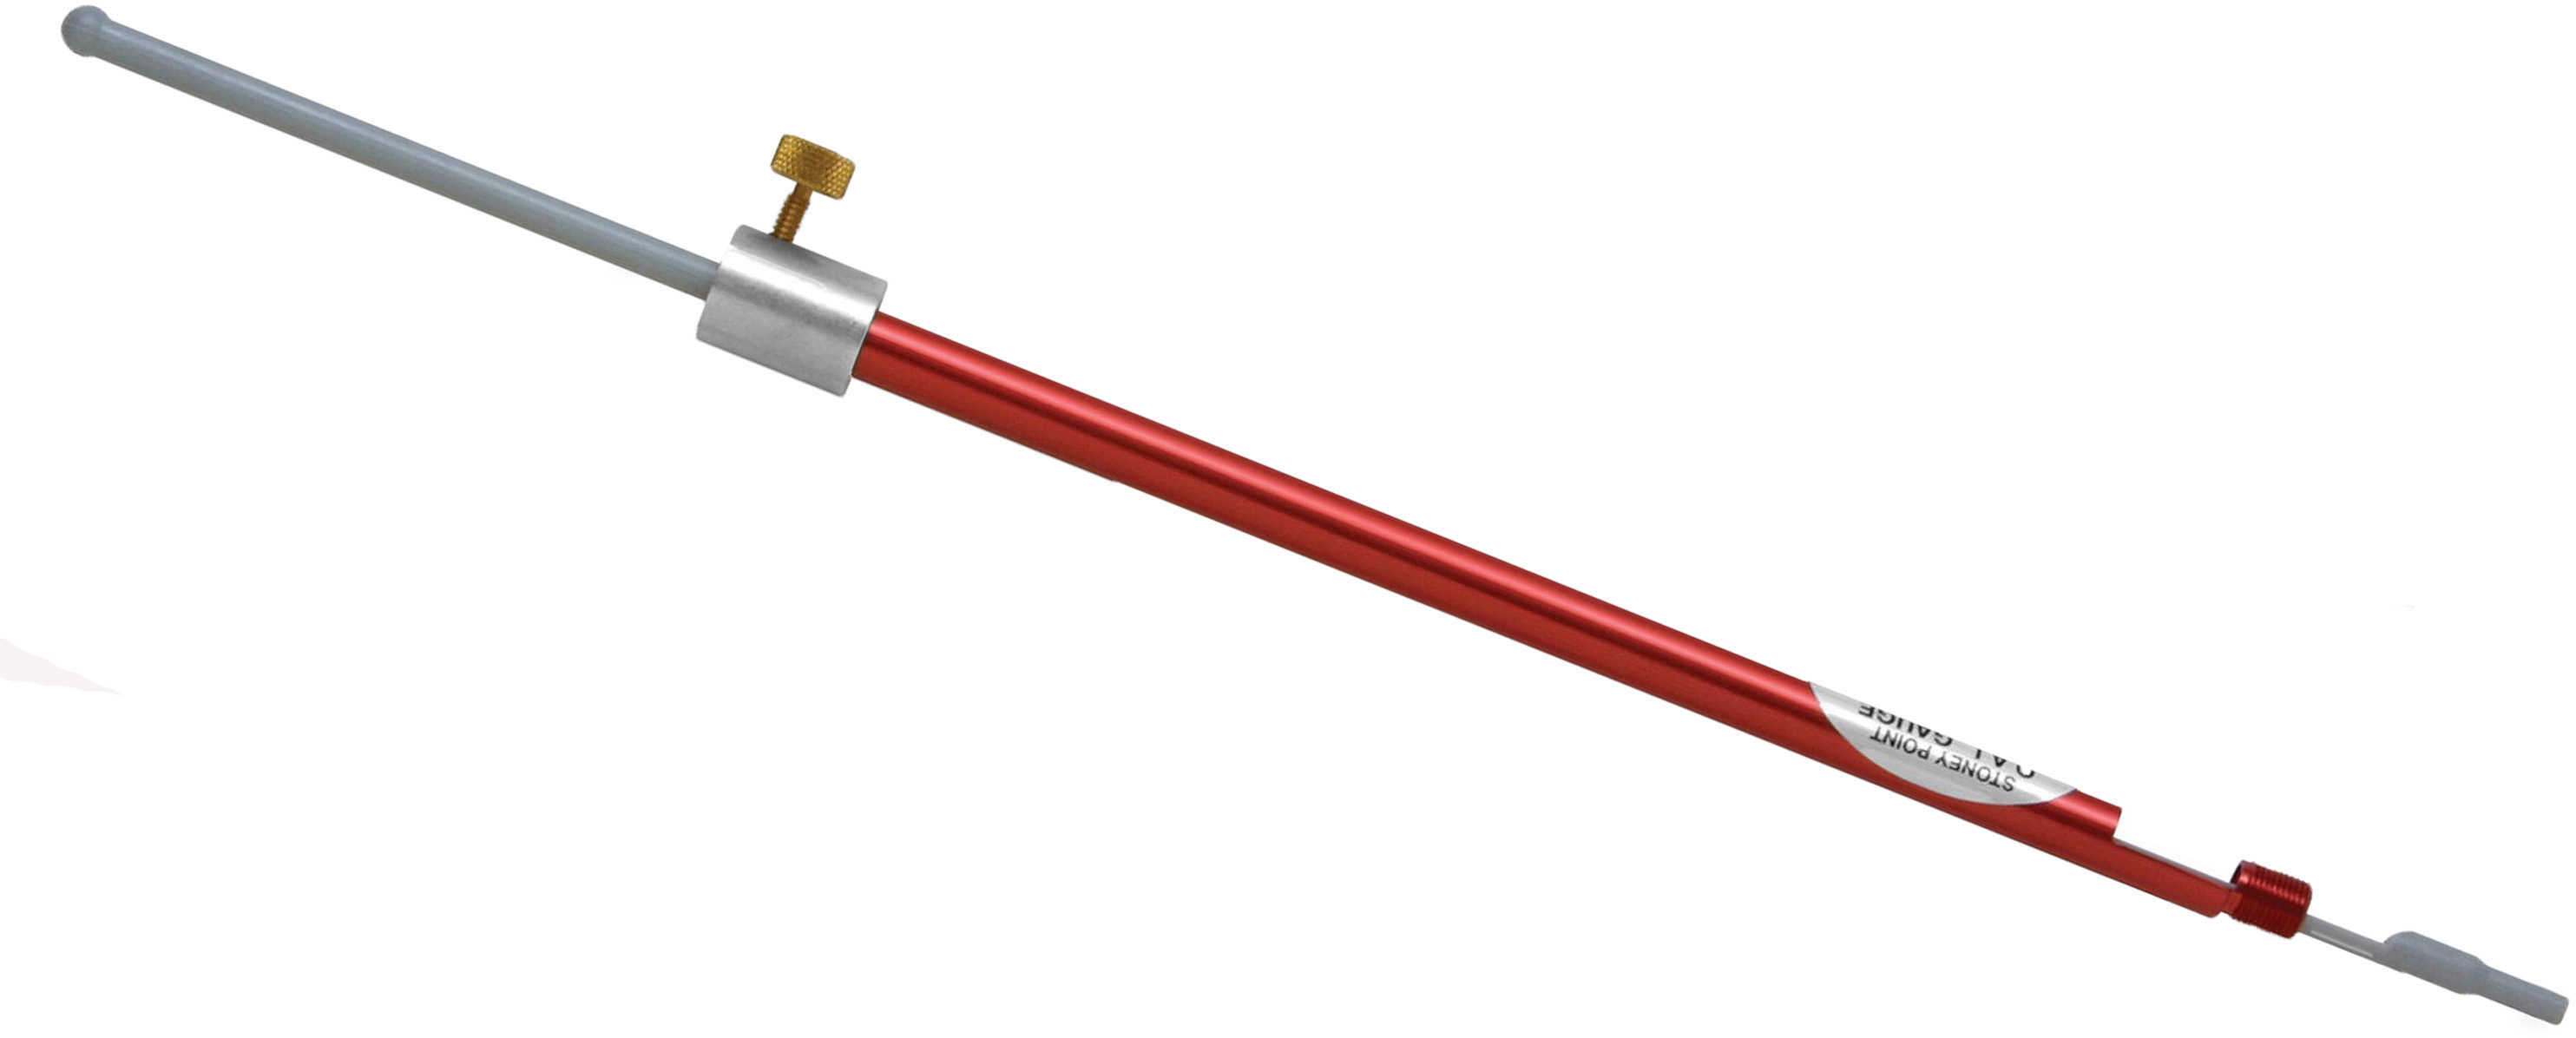 Hornady Lock-N-Load O.A.L Gauge (Overall Length) - Straight